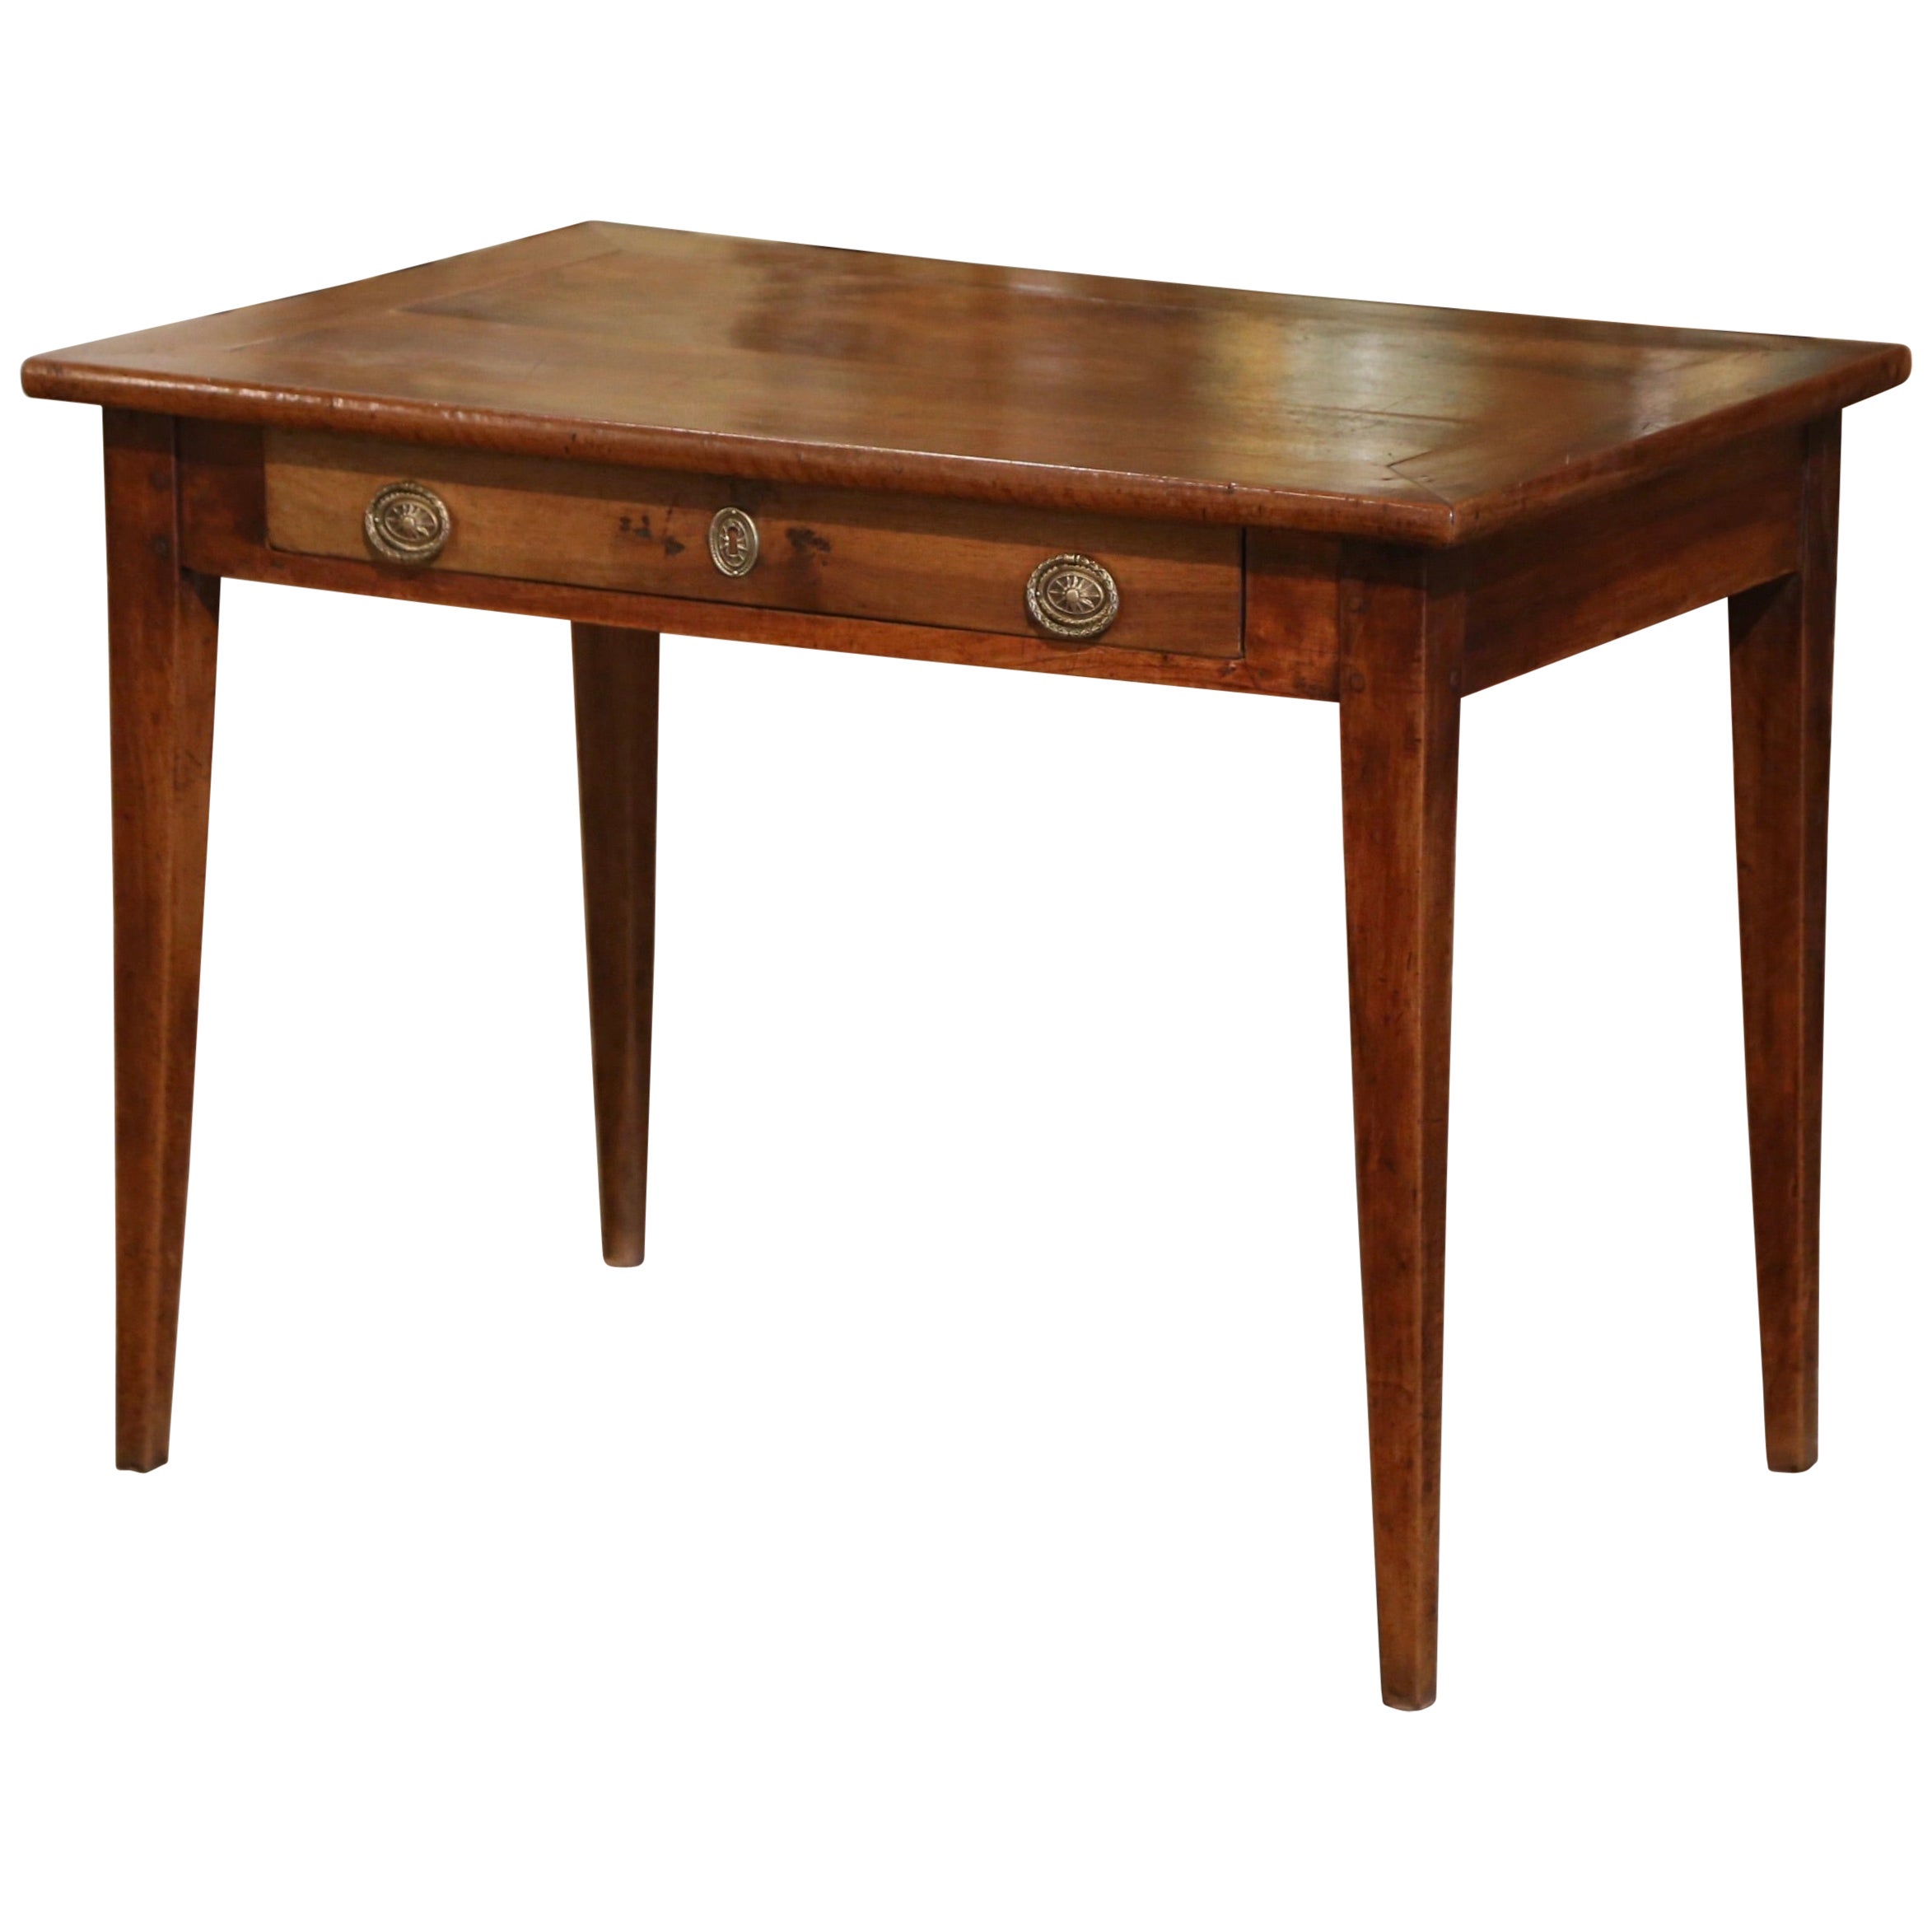 19th Century French Louis Philippe Carved Walnut Side Table Desk with Drawer